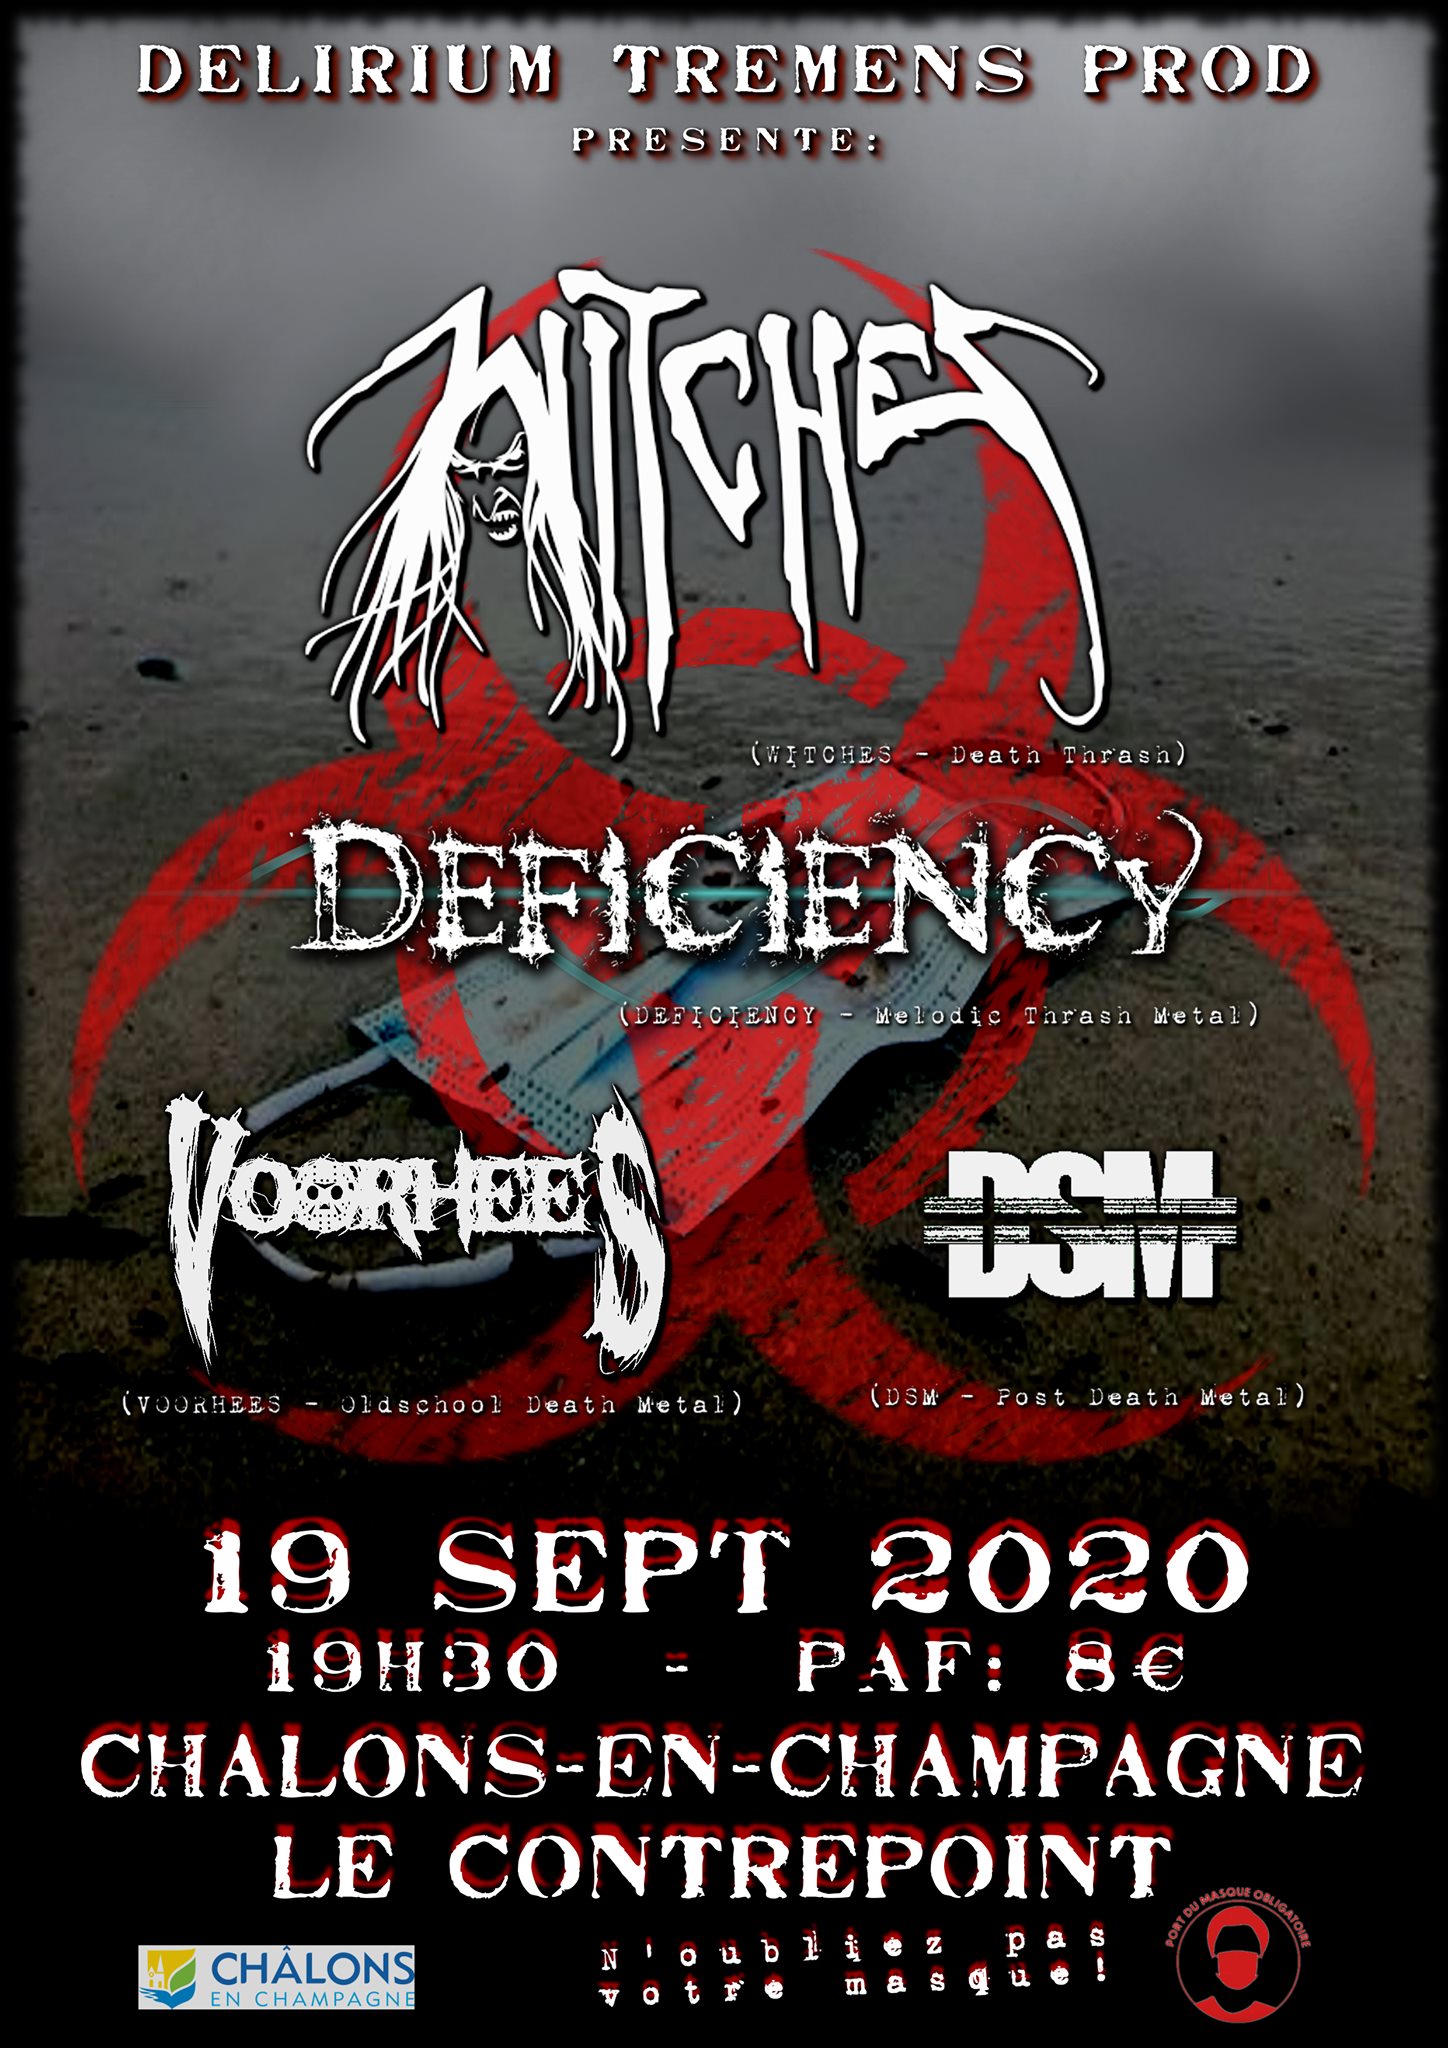 Witches flyer WITCHES + DEFICIENCY + VOORHEES + DSM  @ Night of the Masks Le Contrepoint Chalons en Champagne